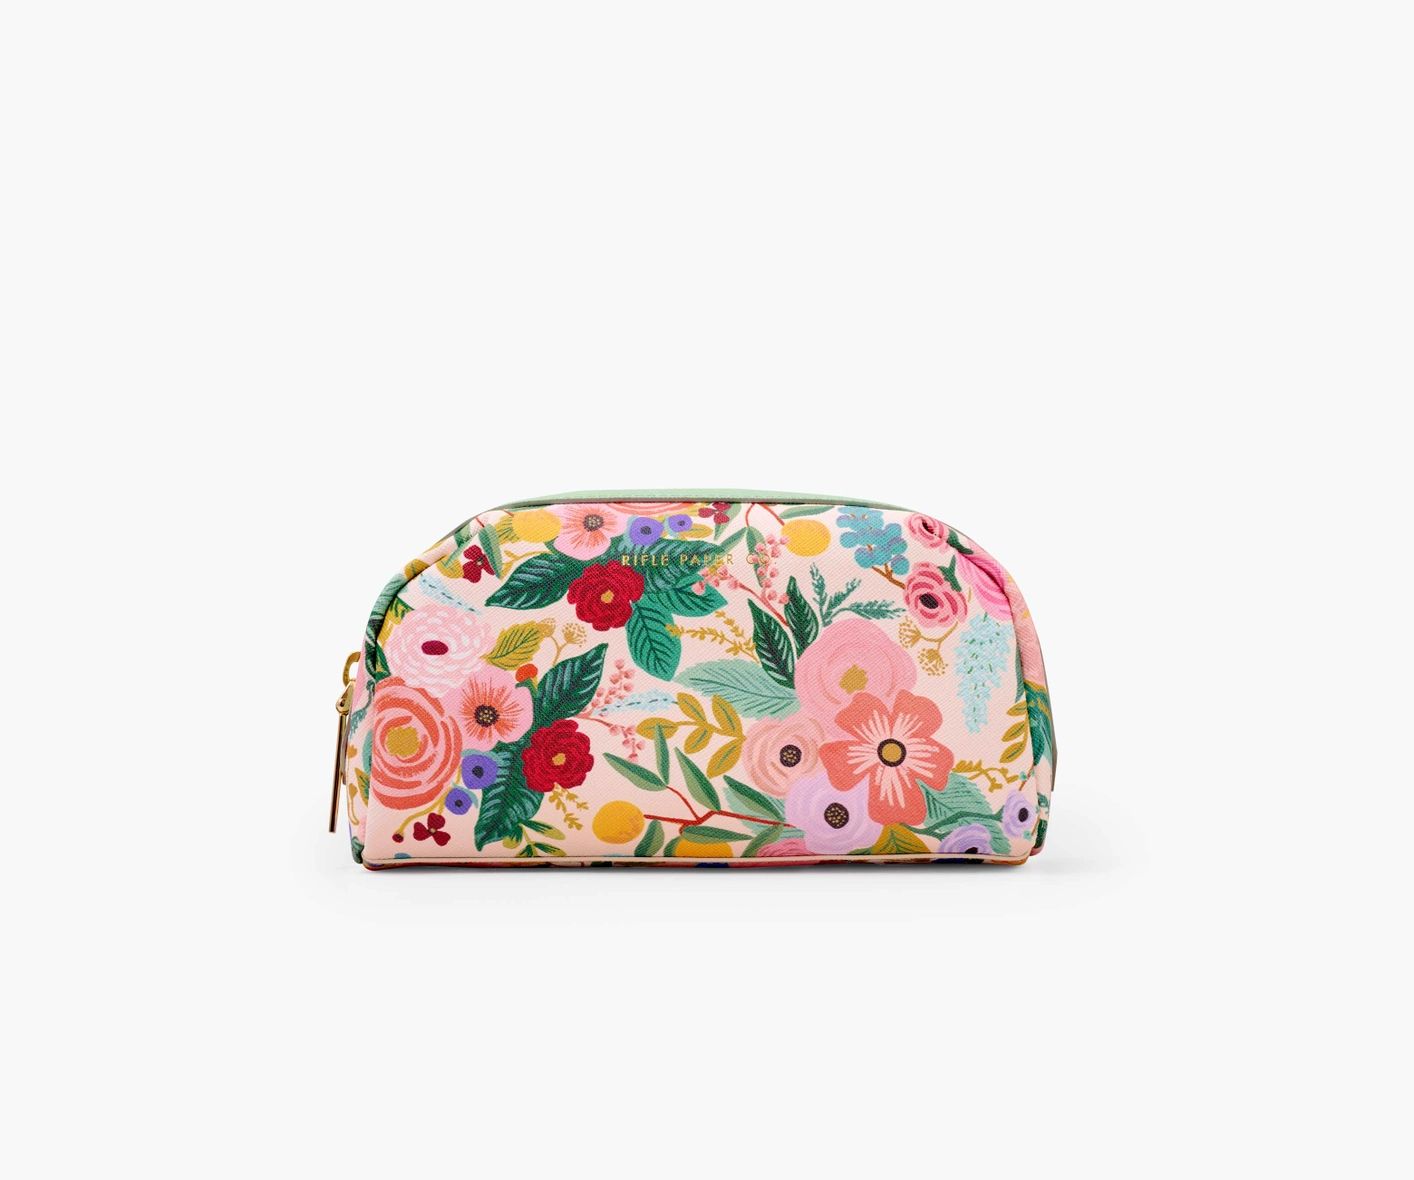 Small Cosmetic Pouch | Rifle Paper Co.